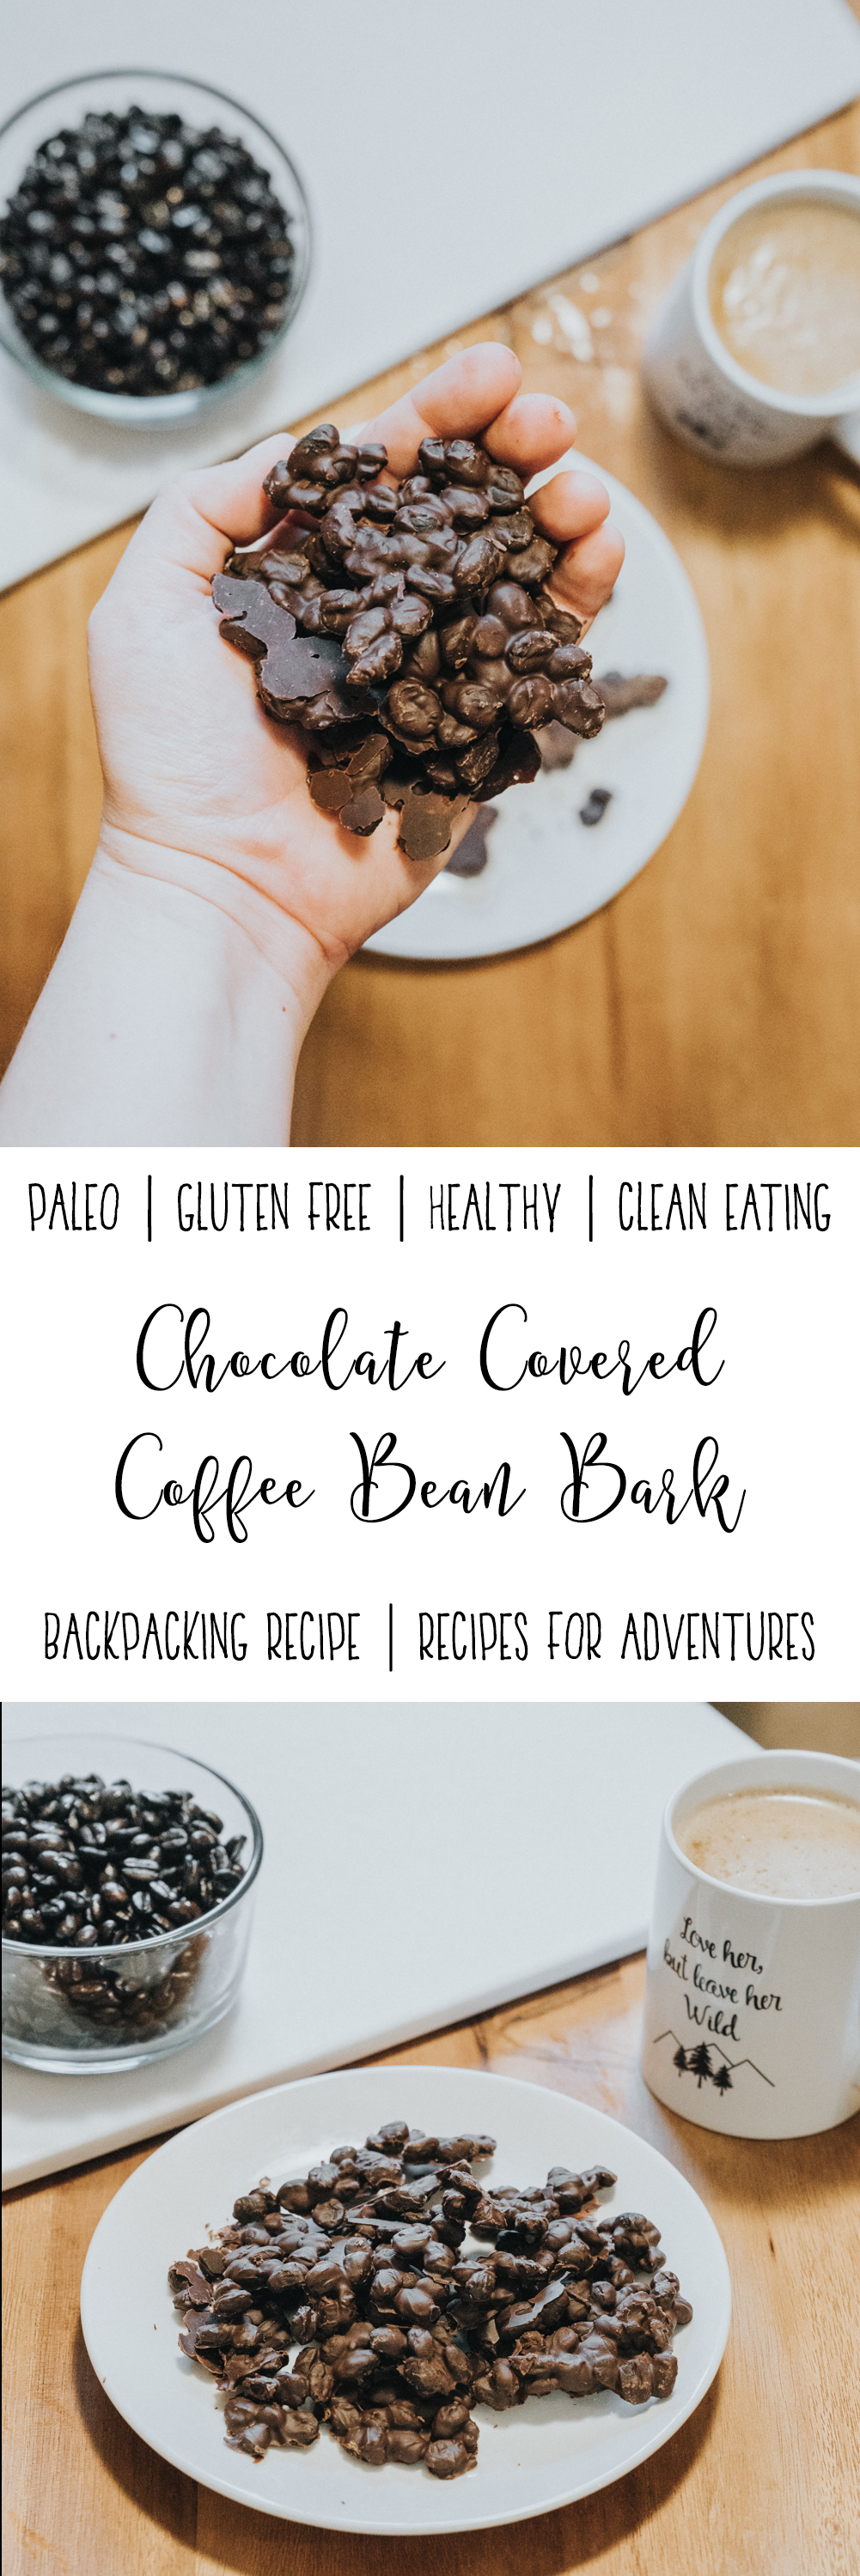 Chocolate Covered Coffee Beans Recipe